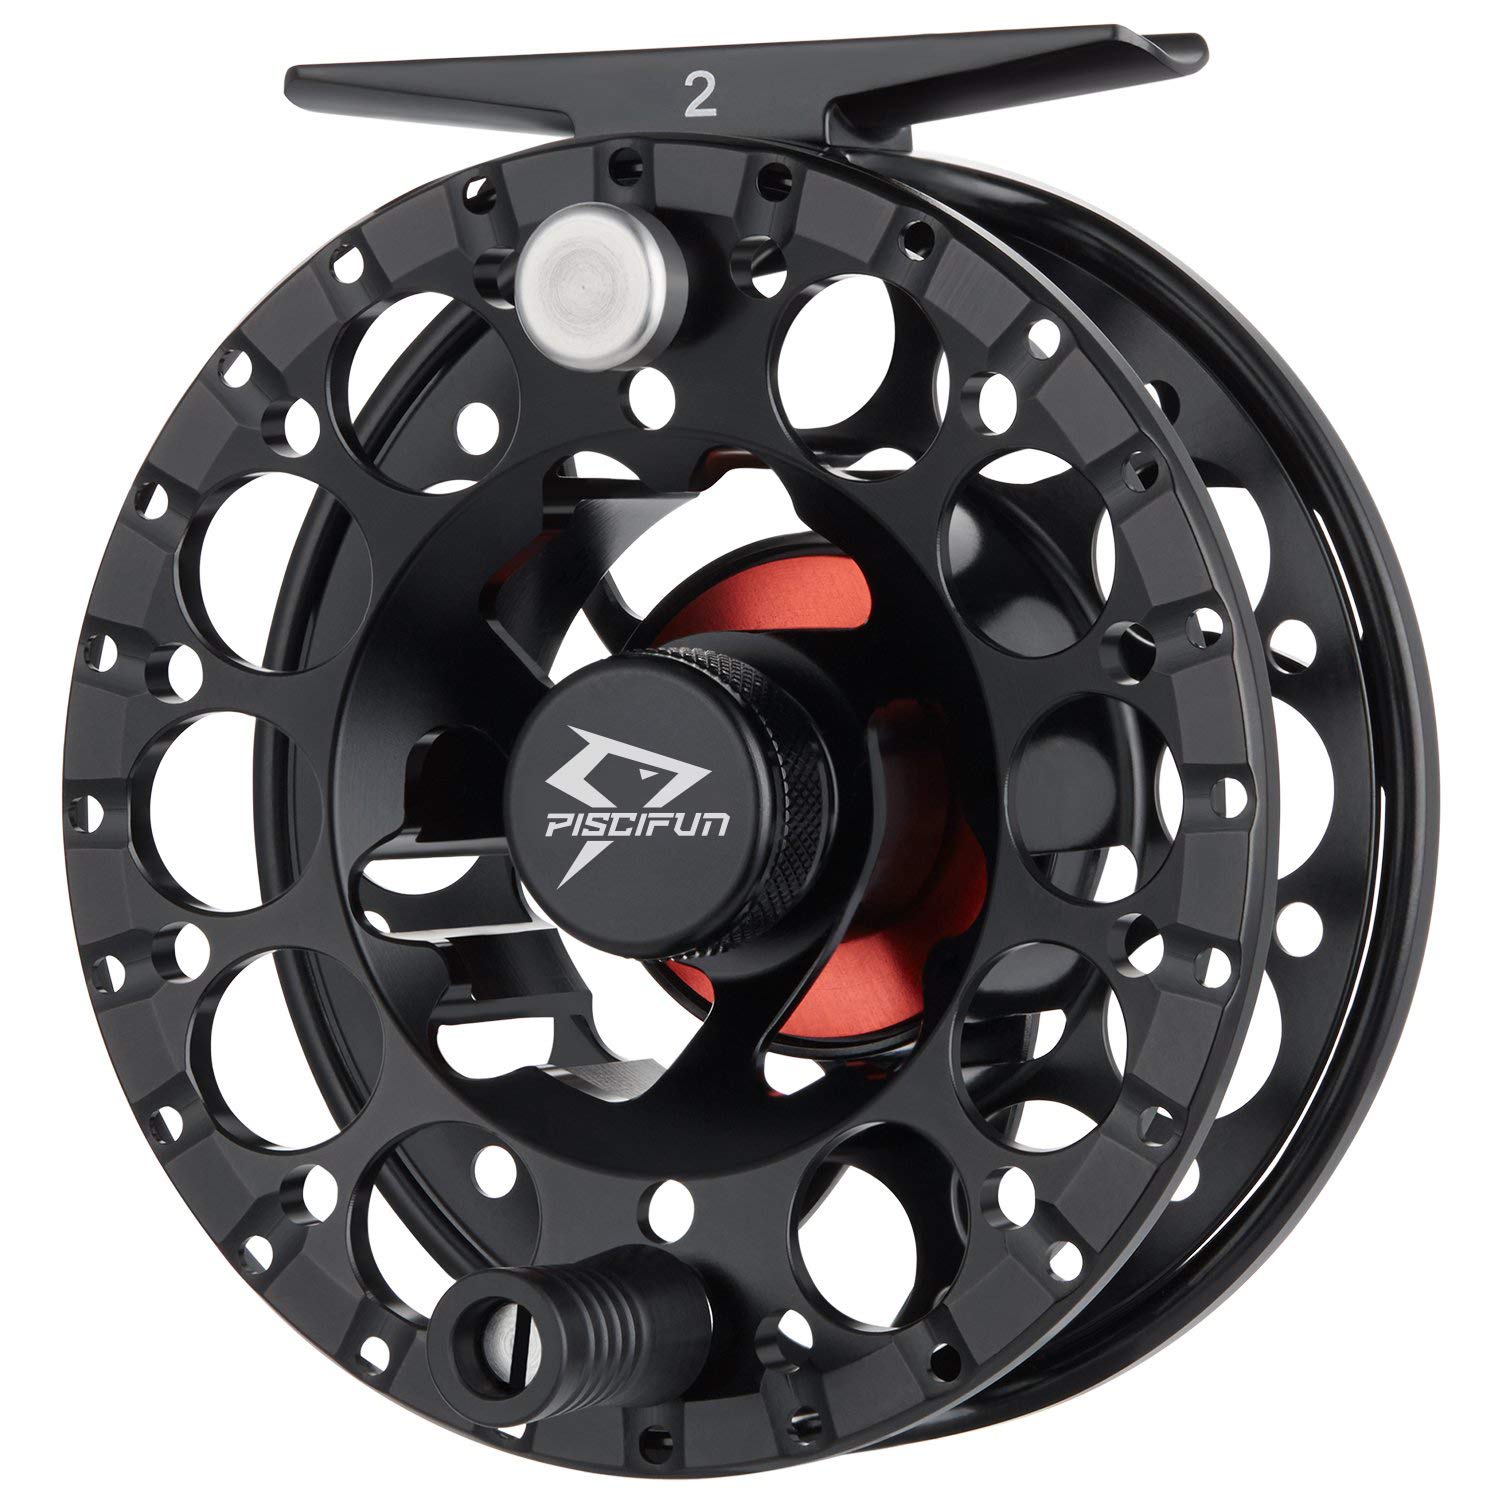 Piscifun Sword Fly Fishing Reel Lighter Weight with CNC-machined